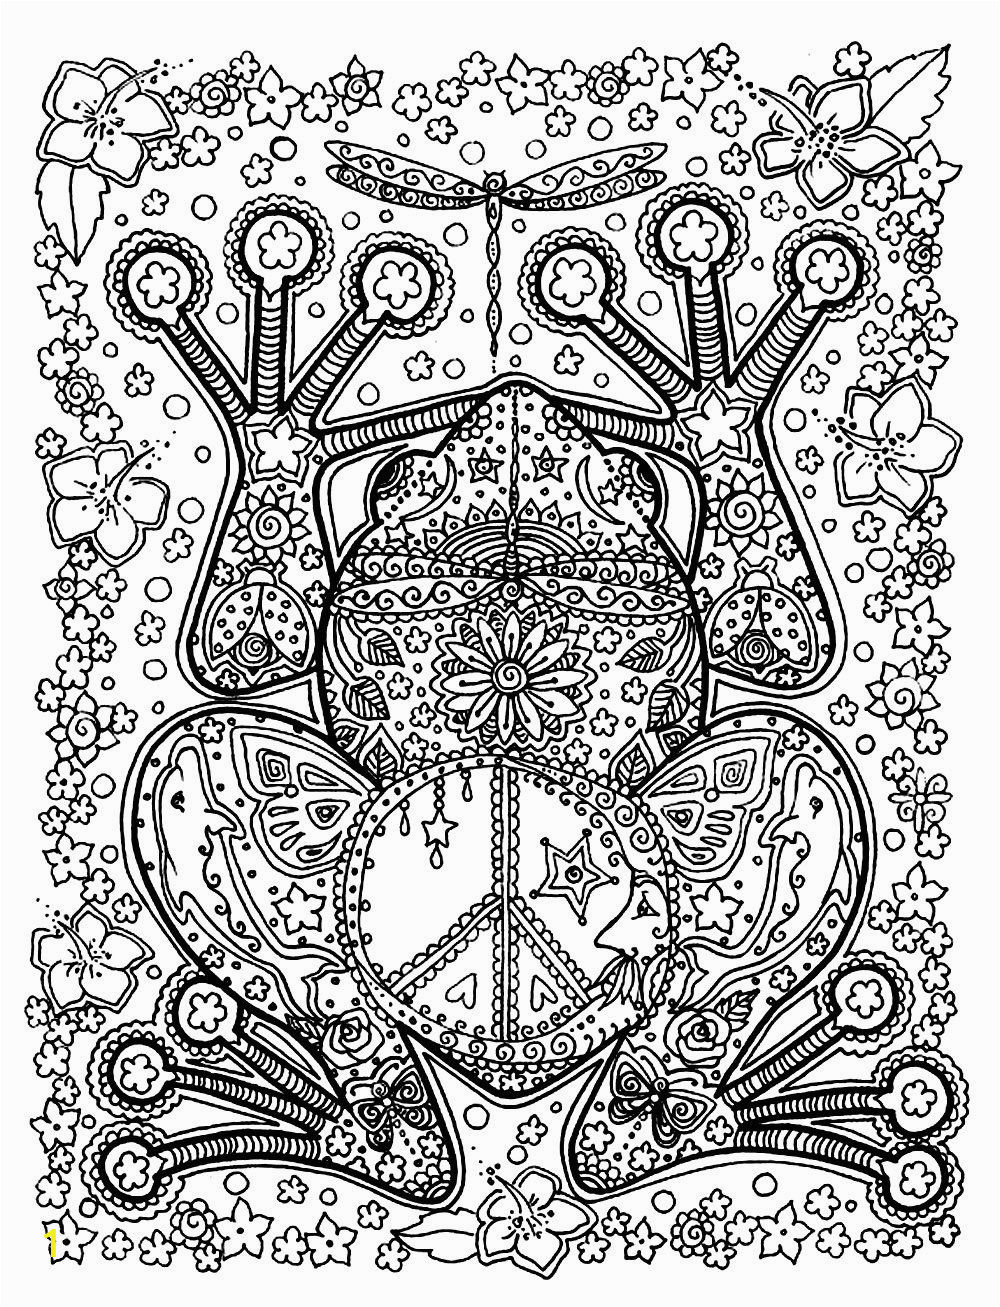 Free Sue Coccia Coloring Pages 50 Printable Adult Coloring Pages that Will Make You Feel